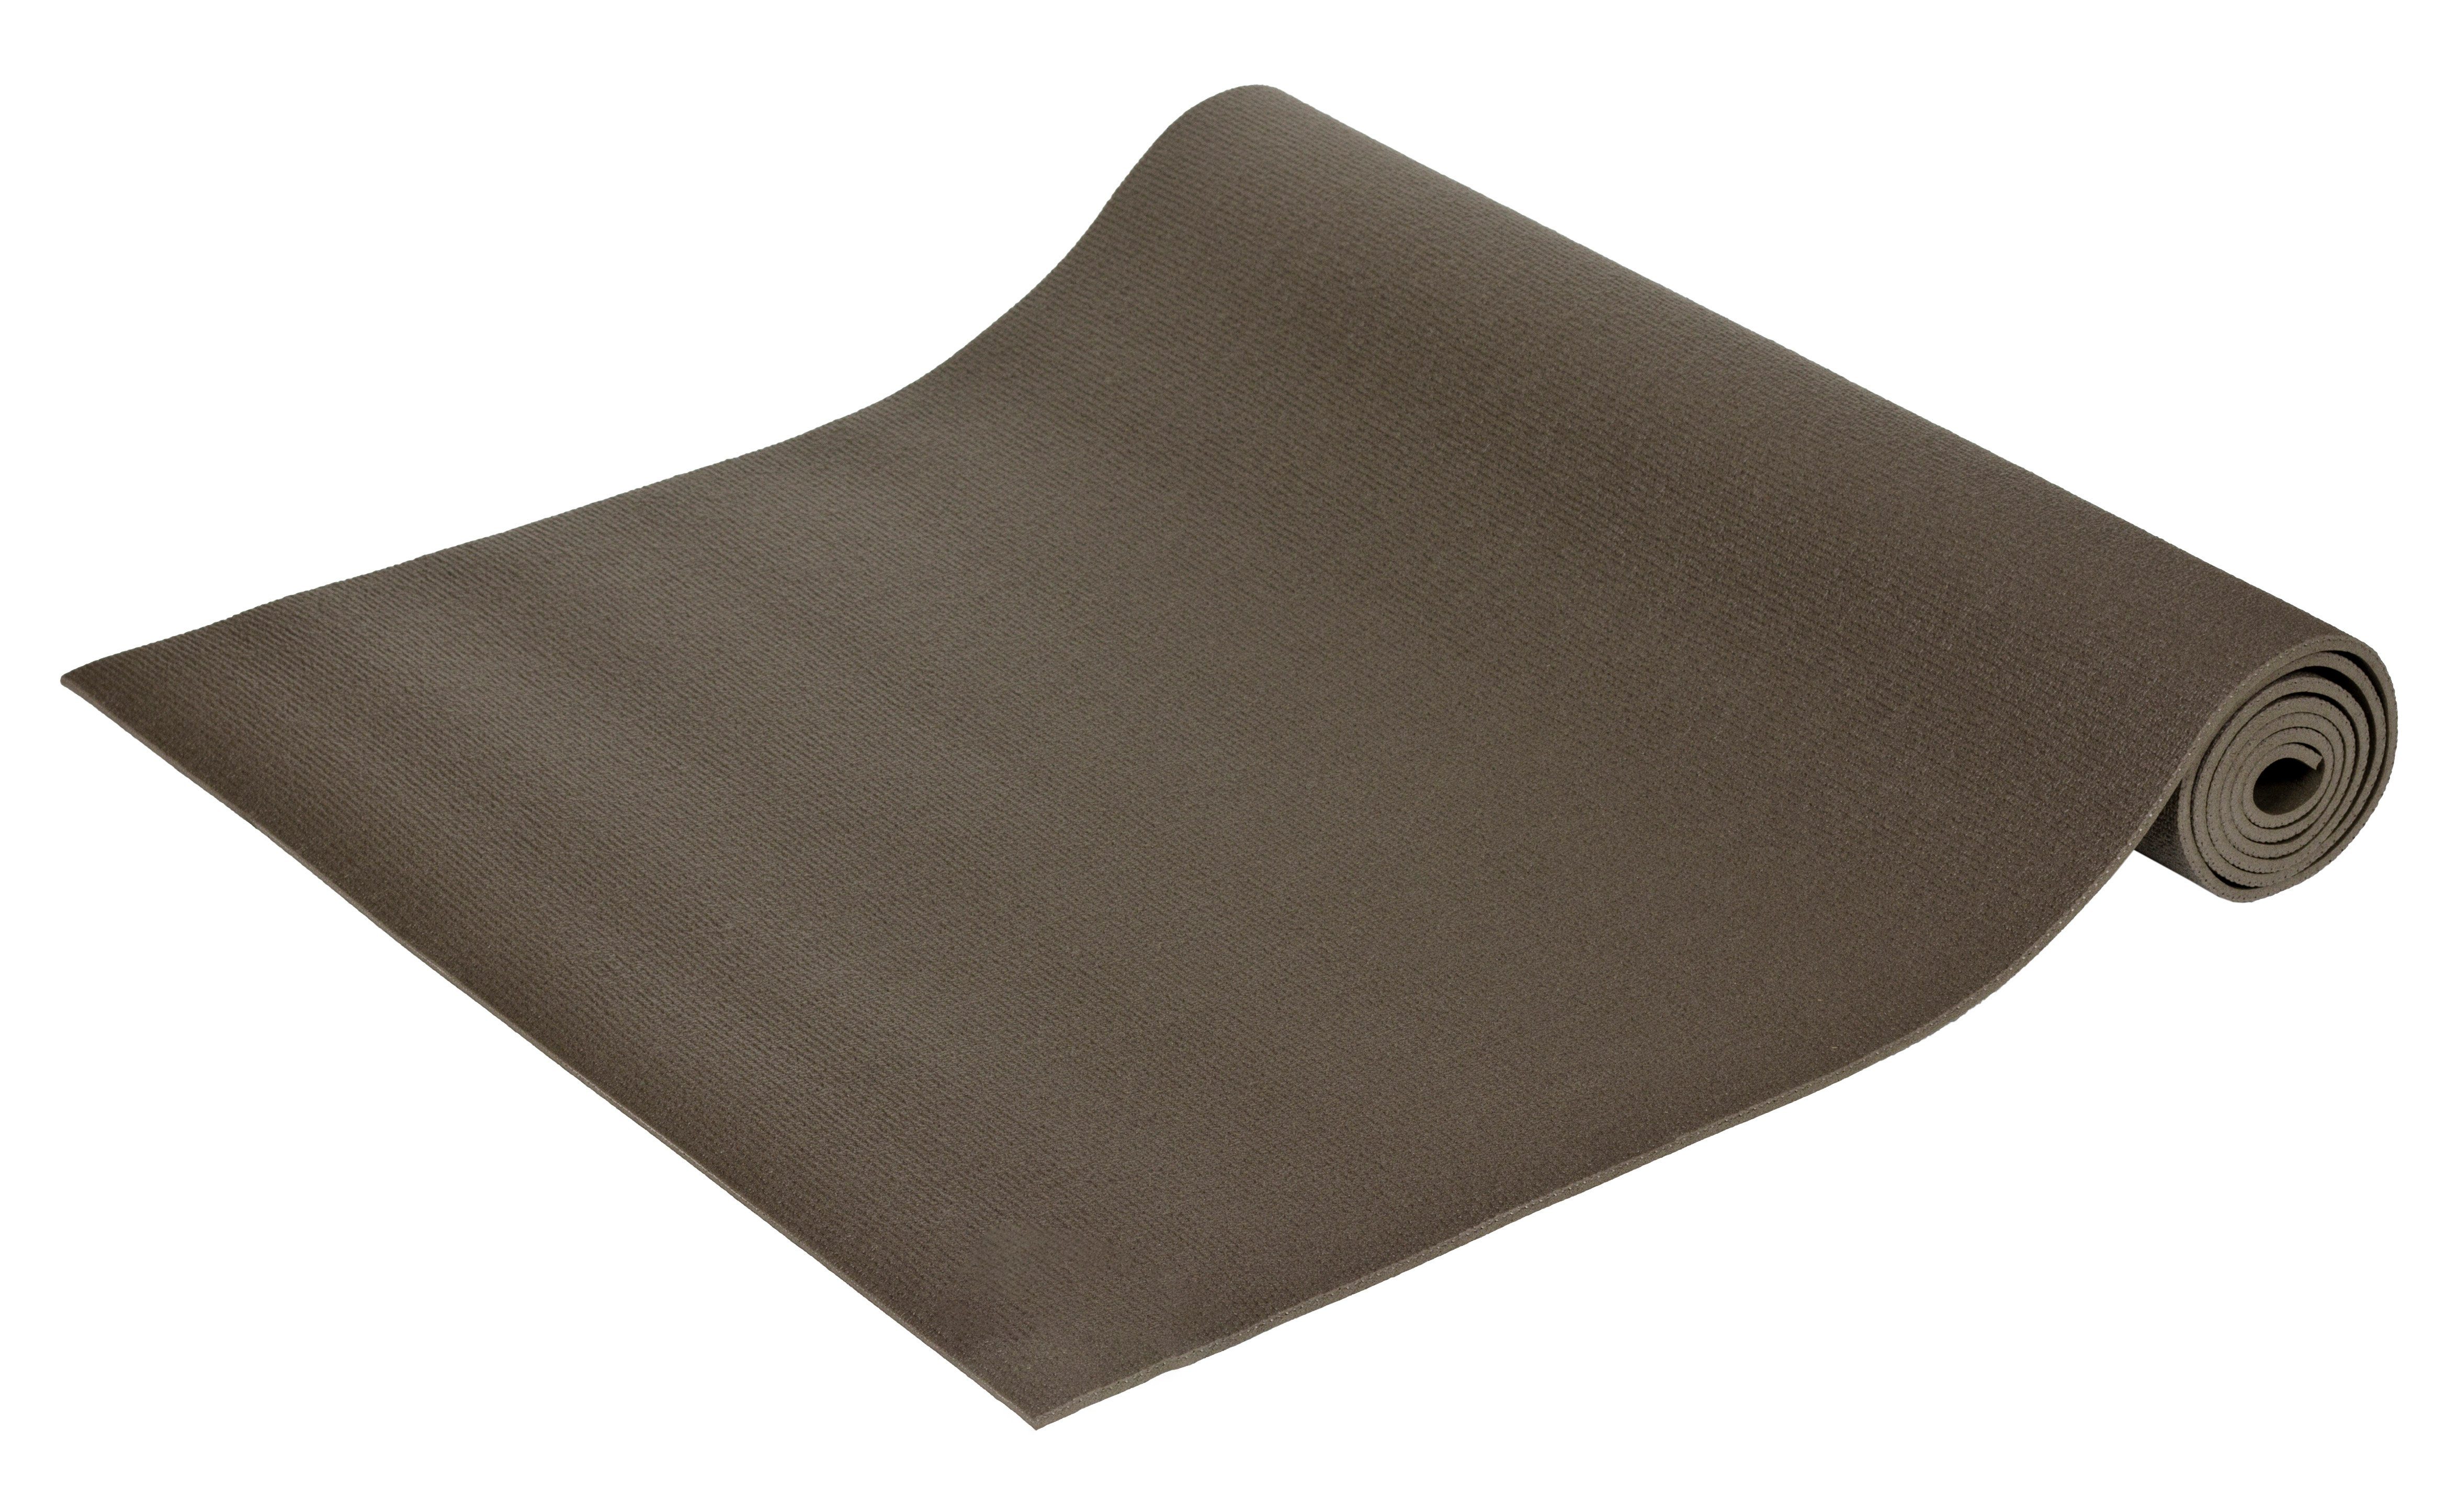 Yogamatte Premium 200 x 60 x 0,3 cm Made in Germany 